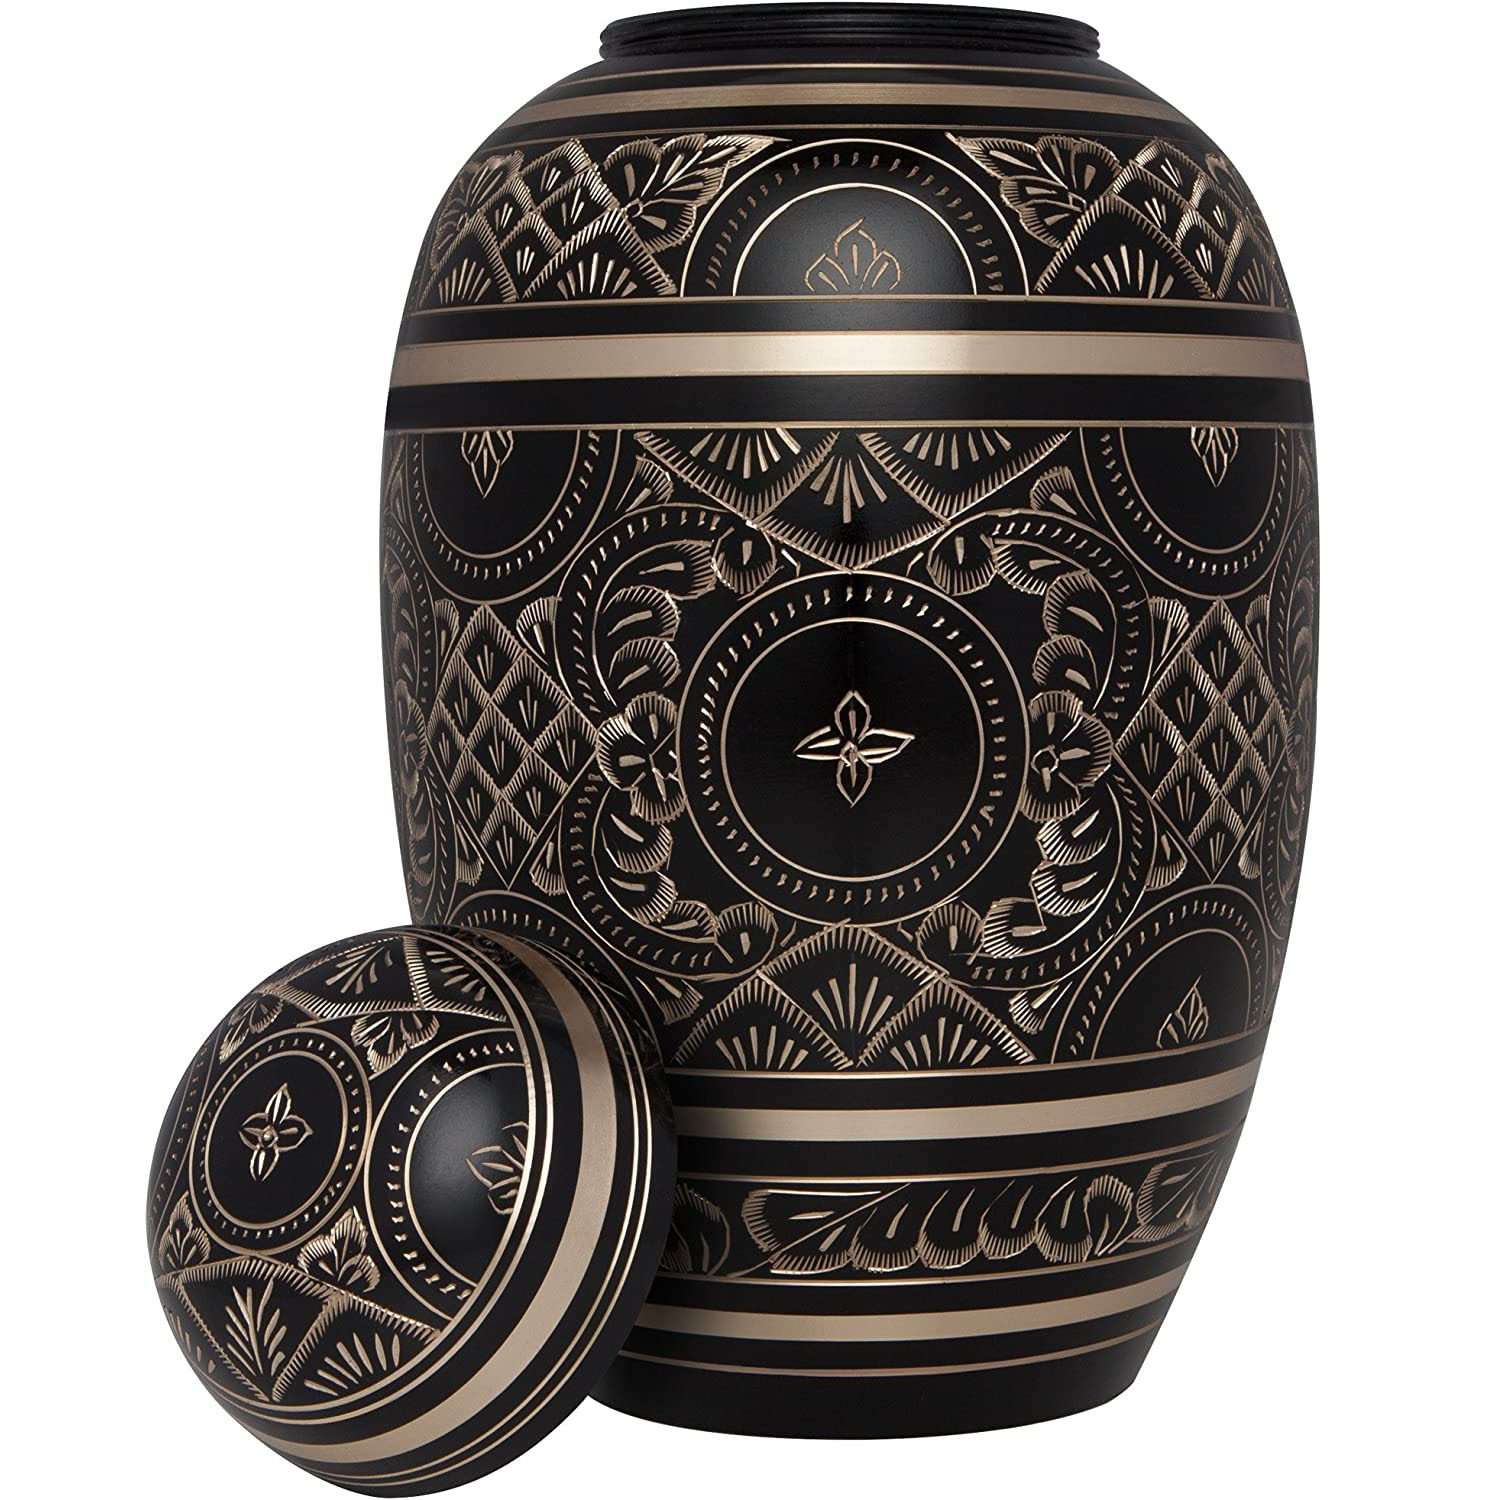 Handcrafted Black Cremation Urn for Human Ashes with Gold Engraving | Brass Cremation Urn